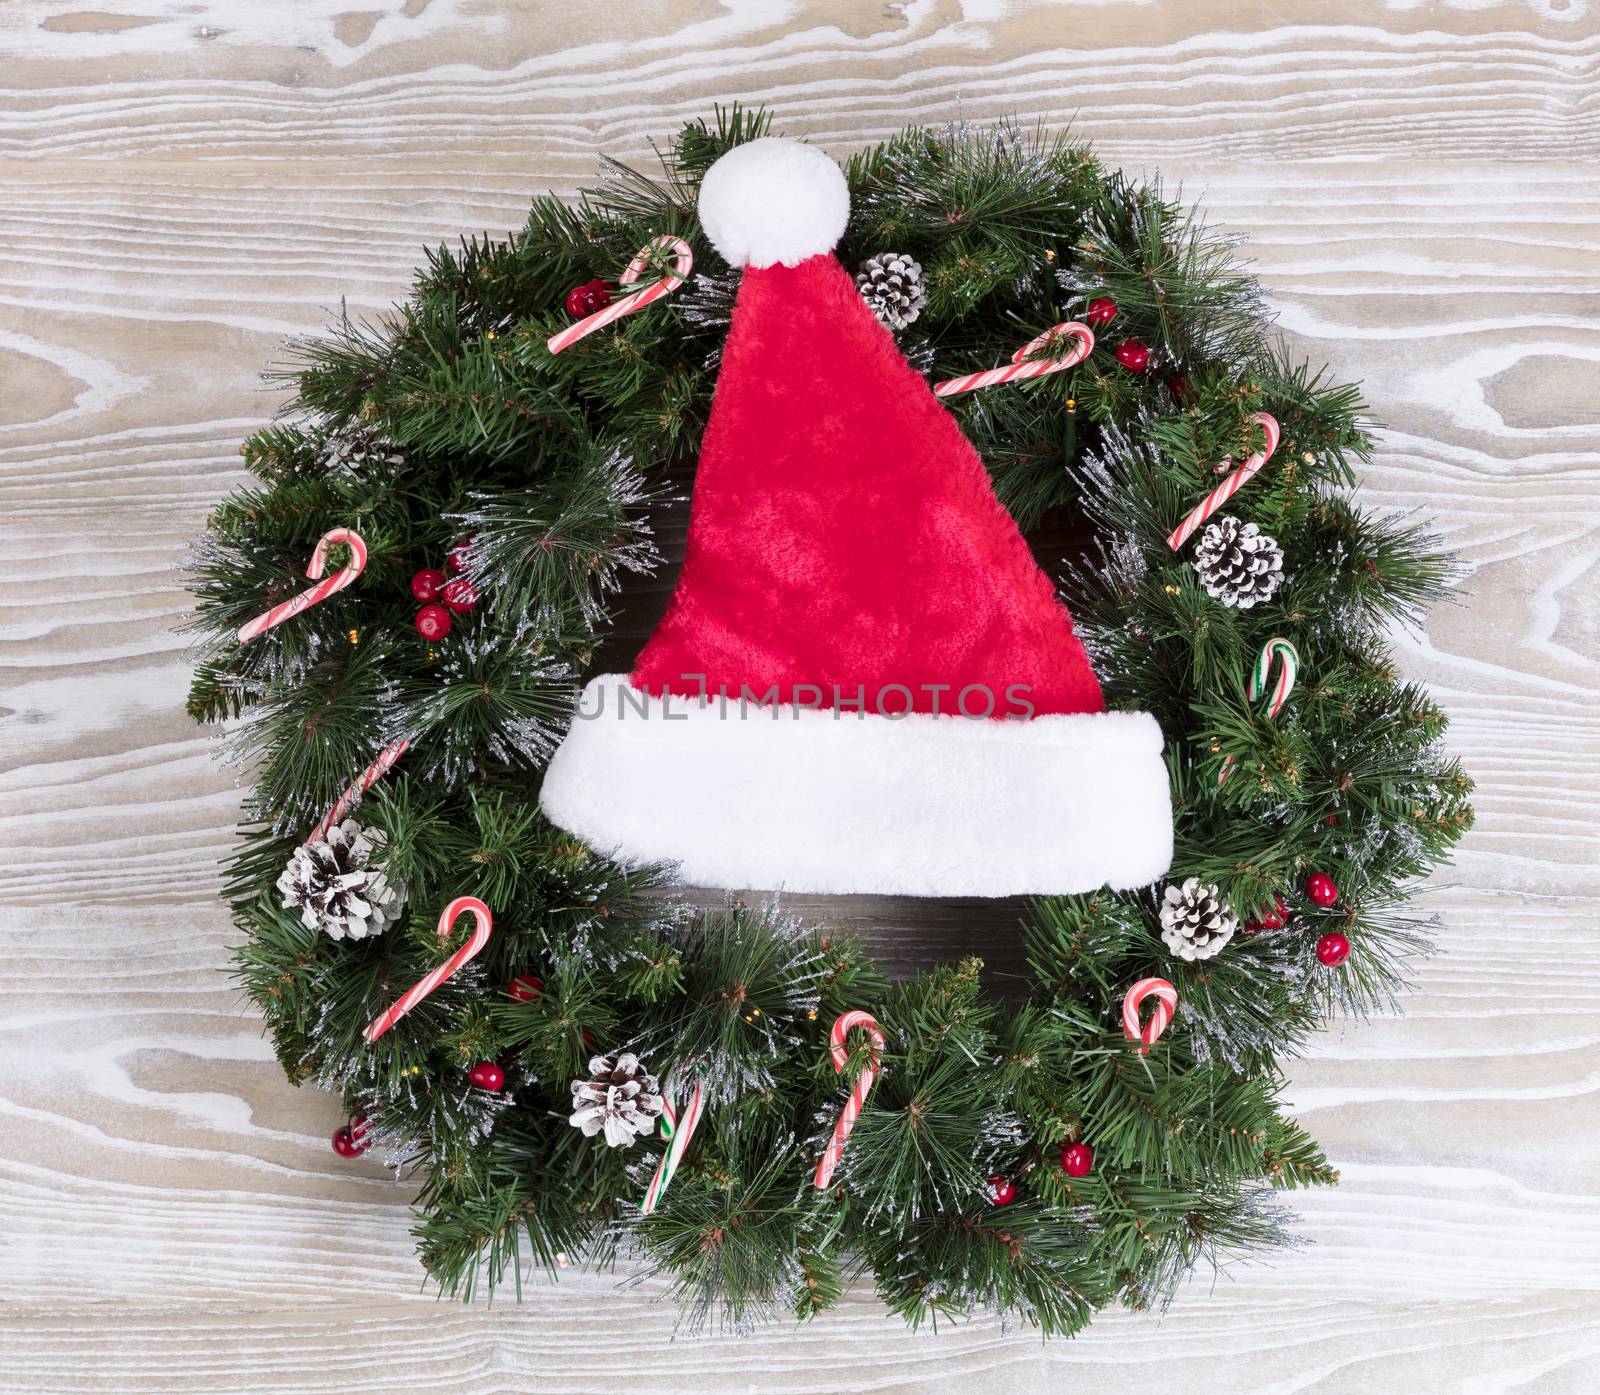 Christmas wreath and Santa cap with lights and candy canes on wh by tab1962